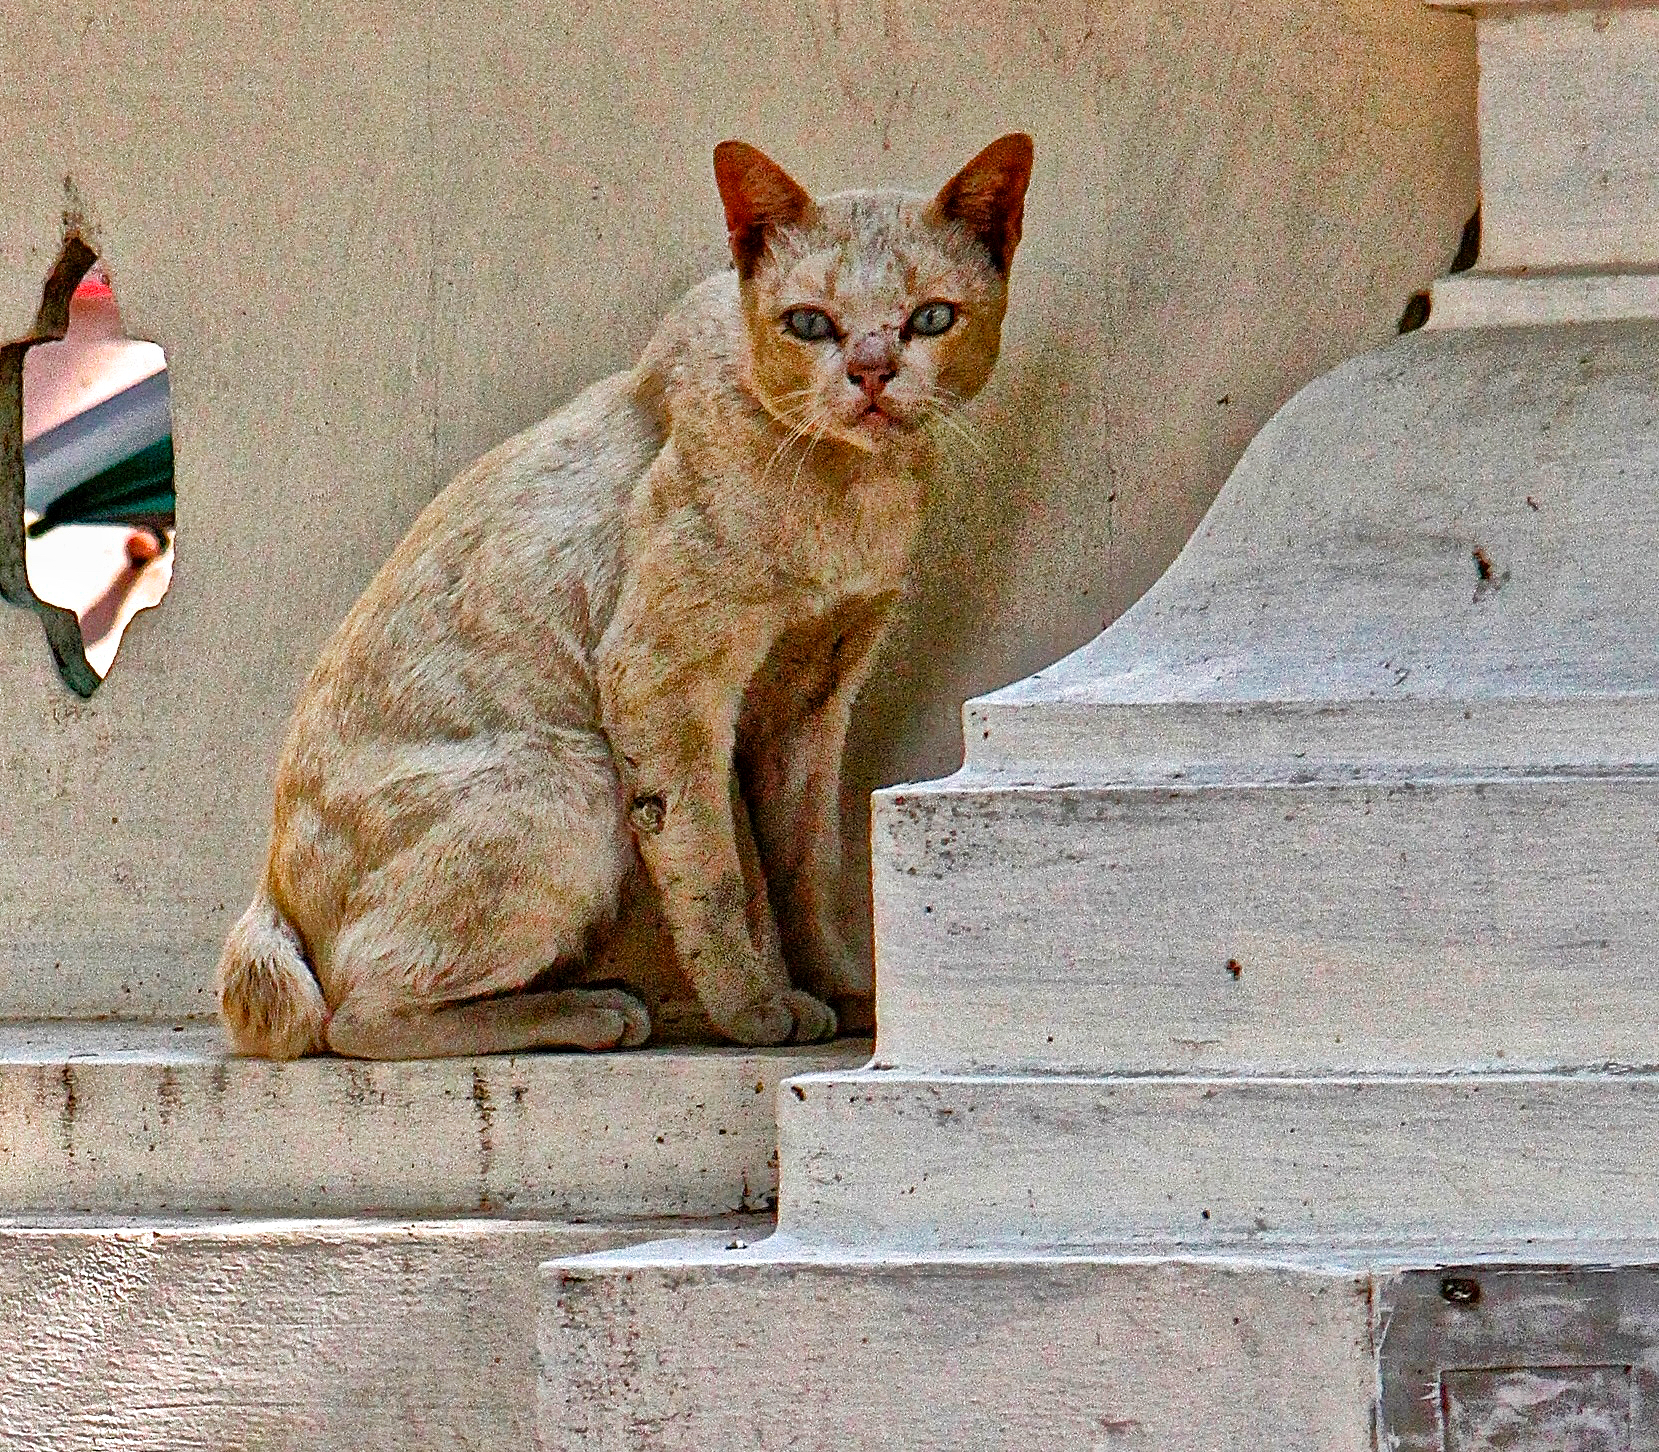 A cat sitting on the steps of a building.